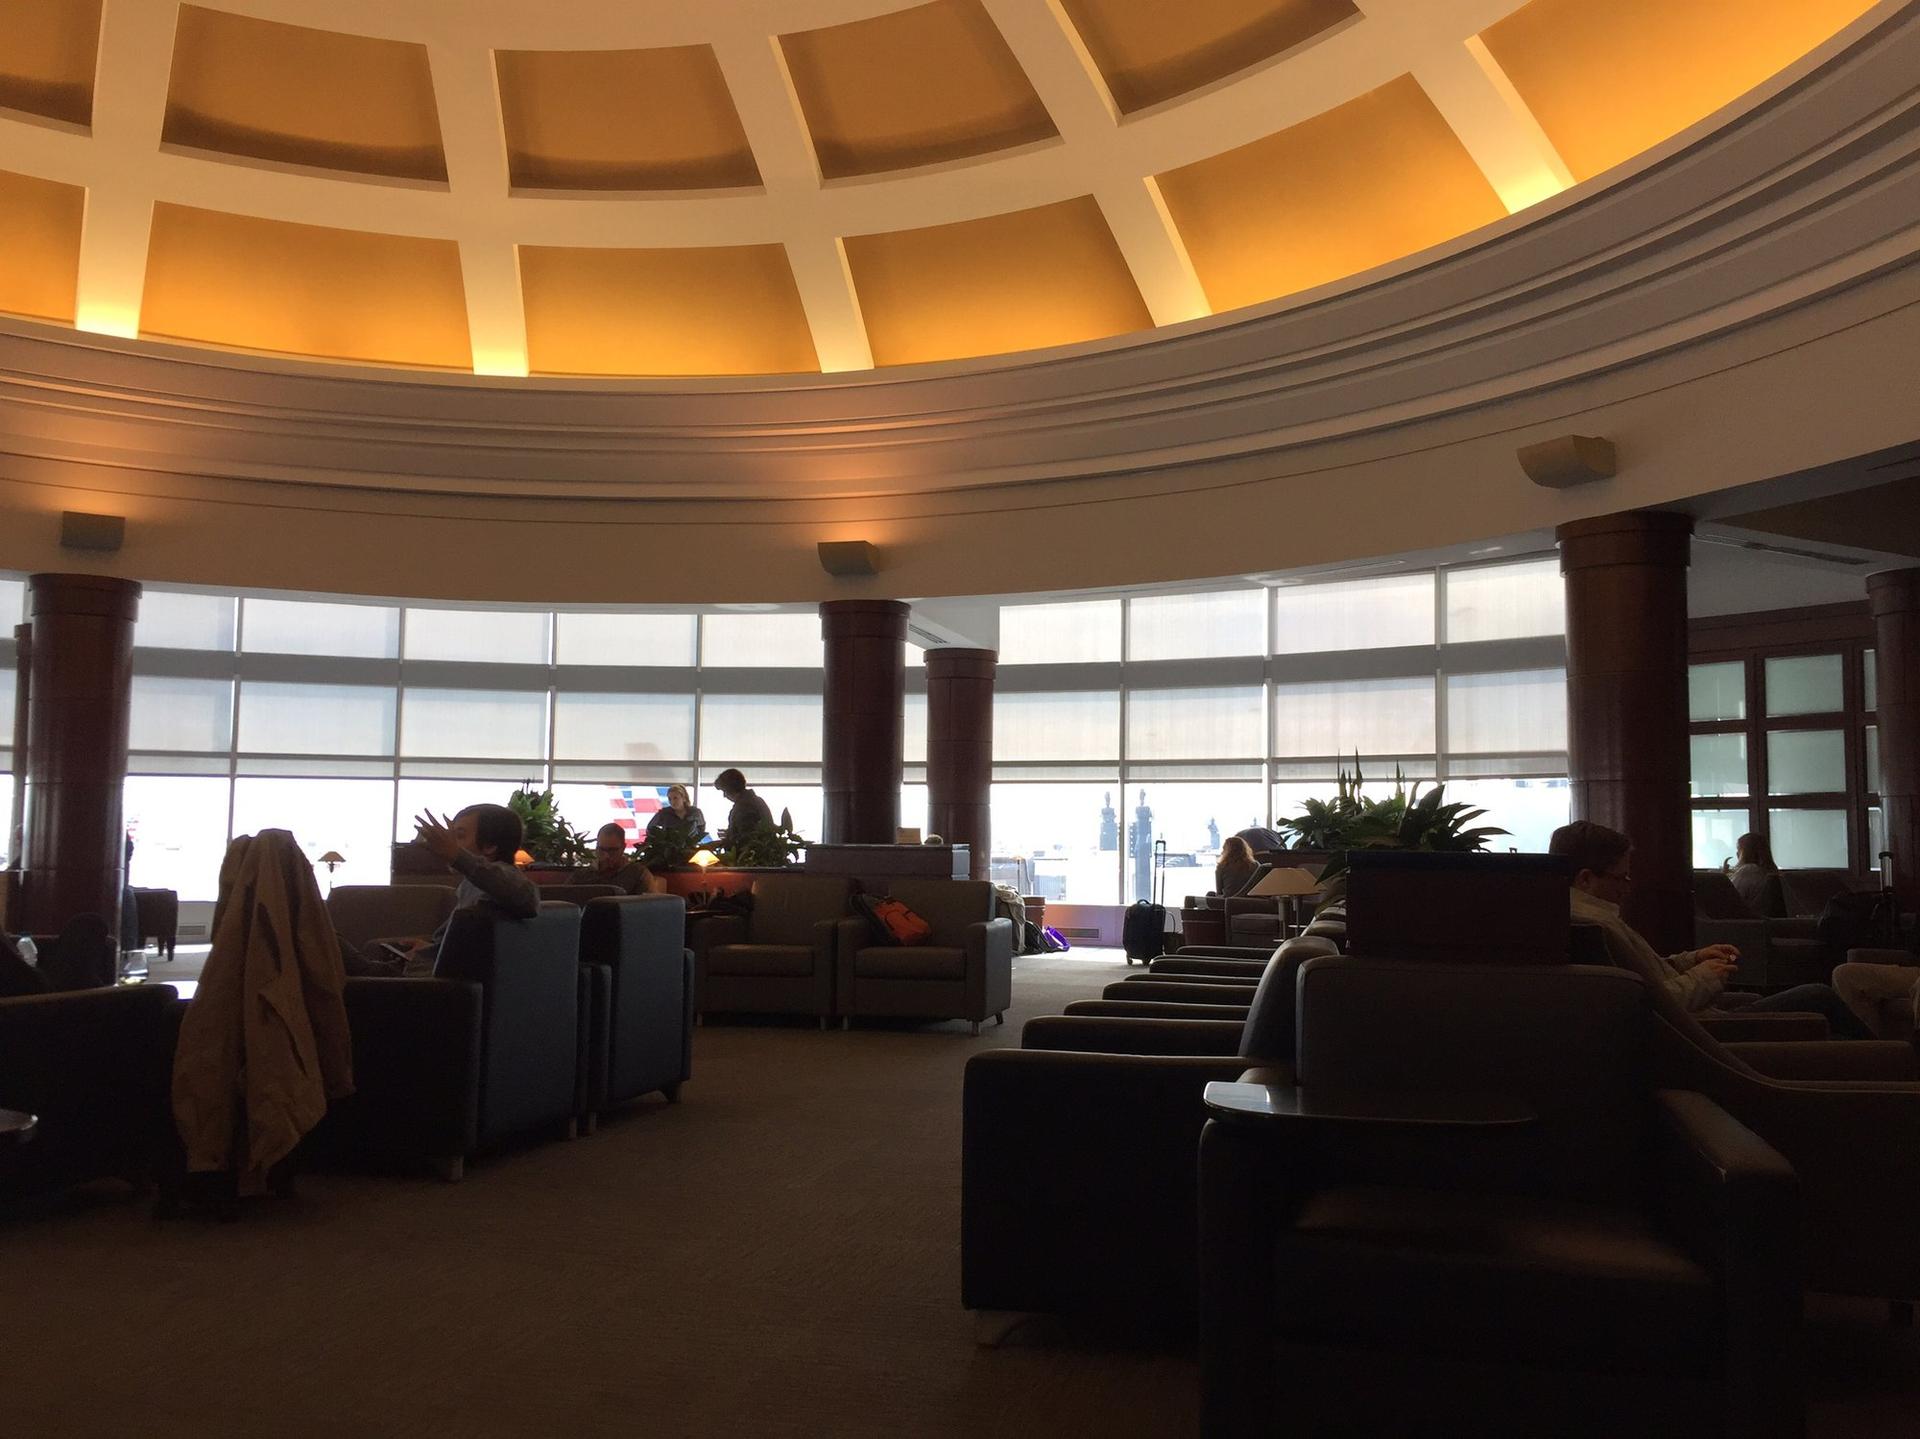 American Airlines Admirals Club image 14 of 37